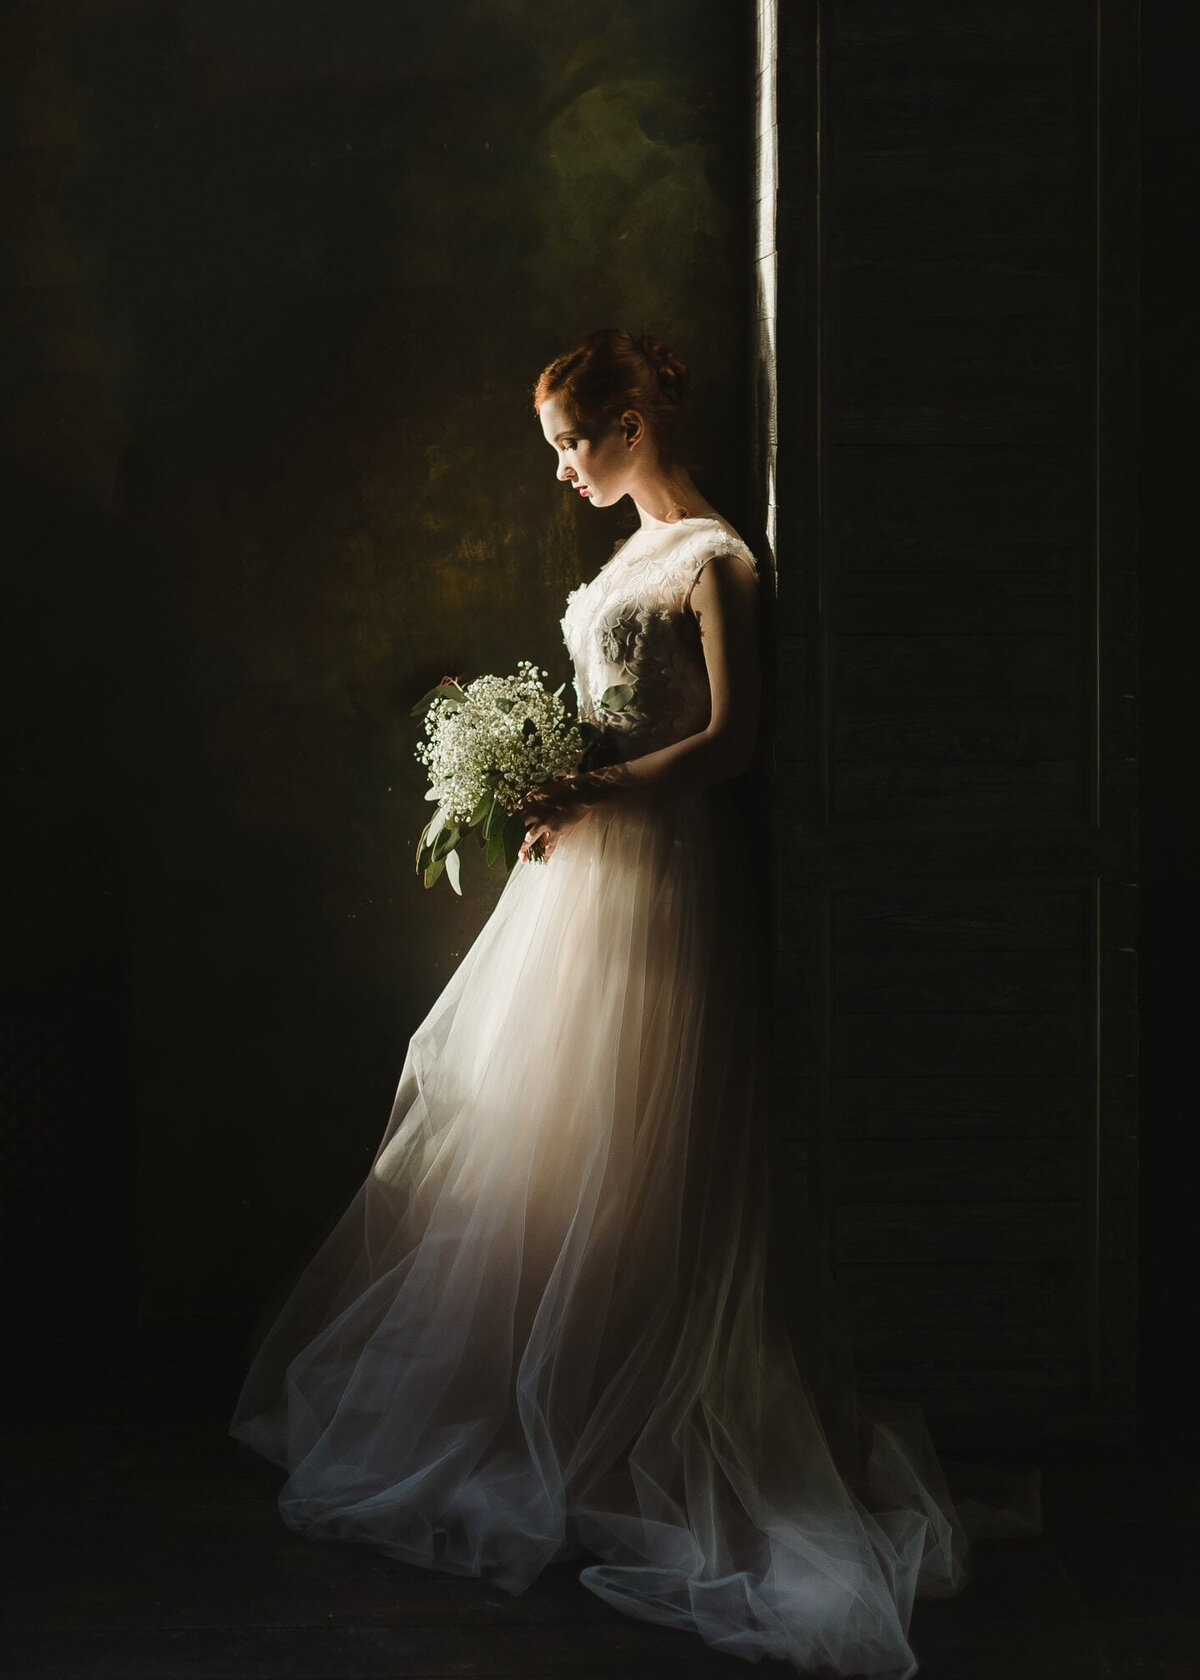 A red headed bride leans against a wall in her wedding dress, holding a beautiful bouquet.